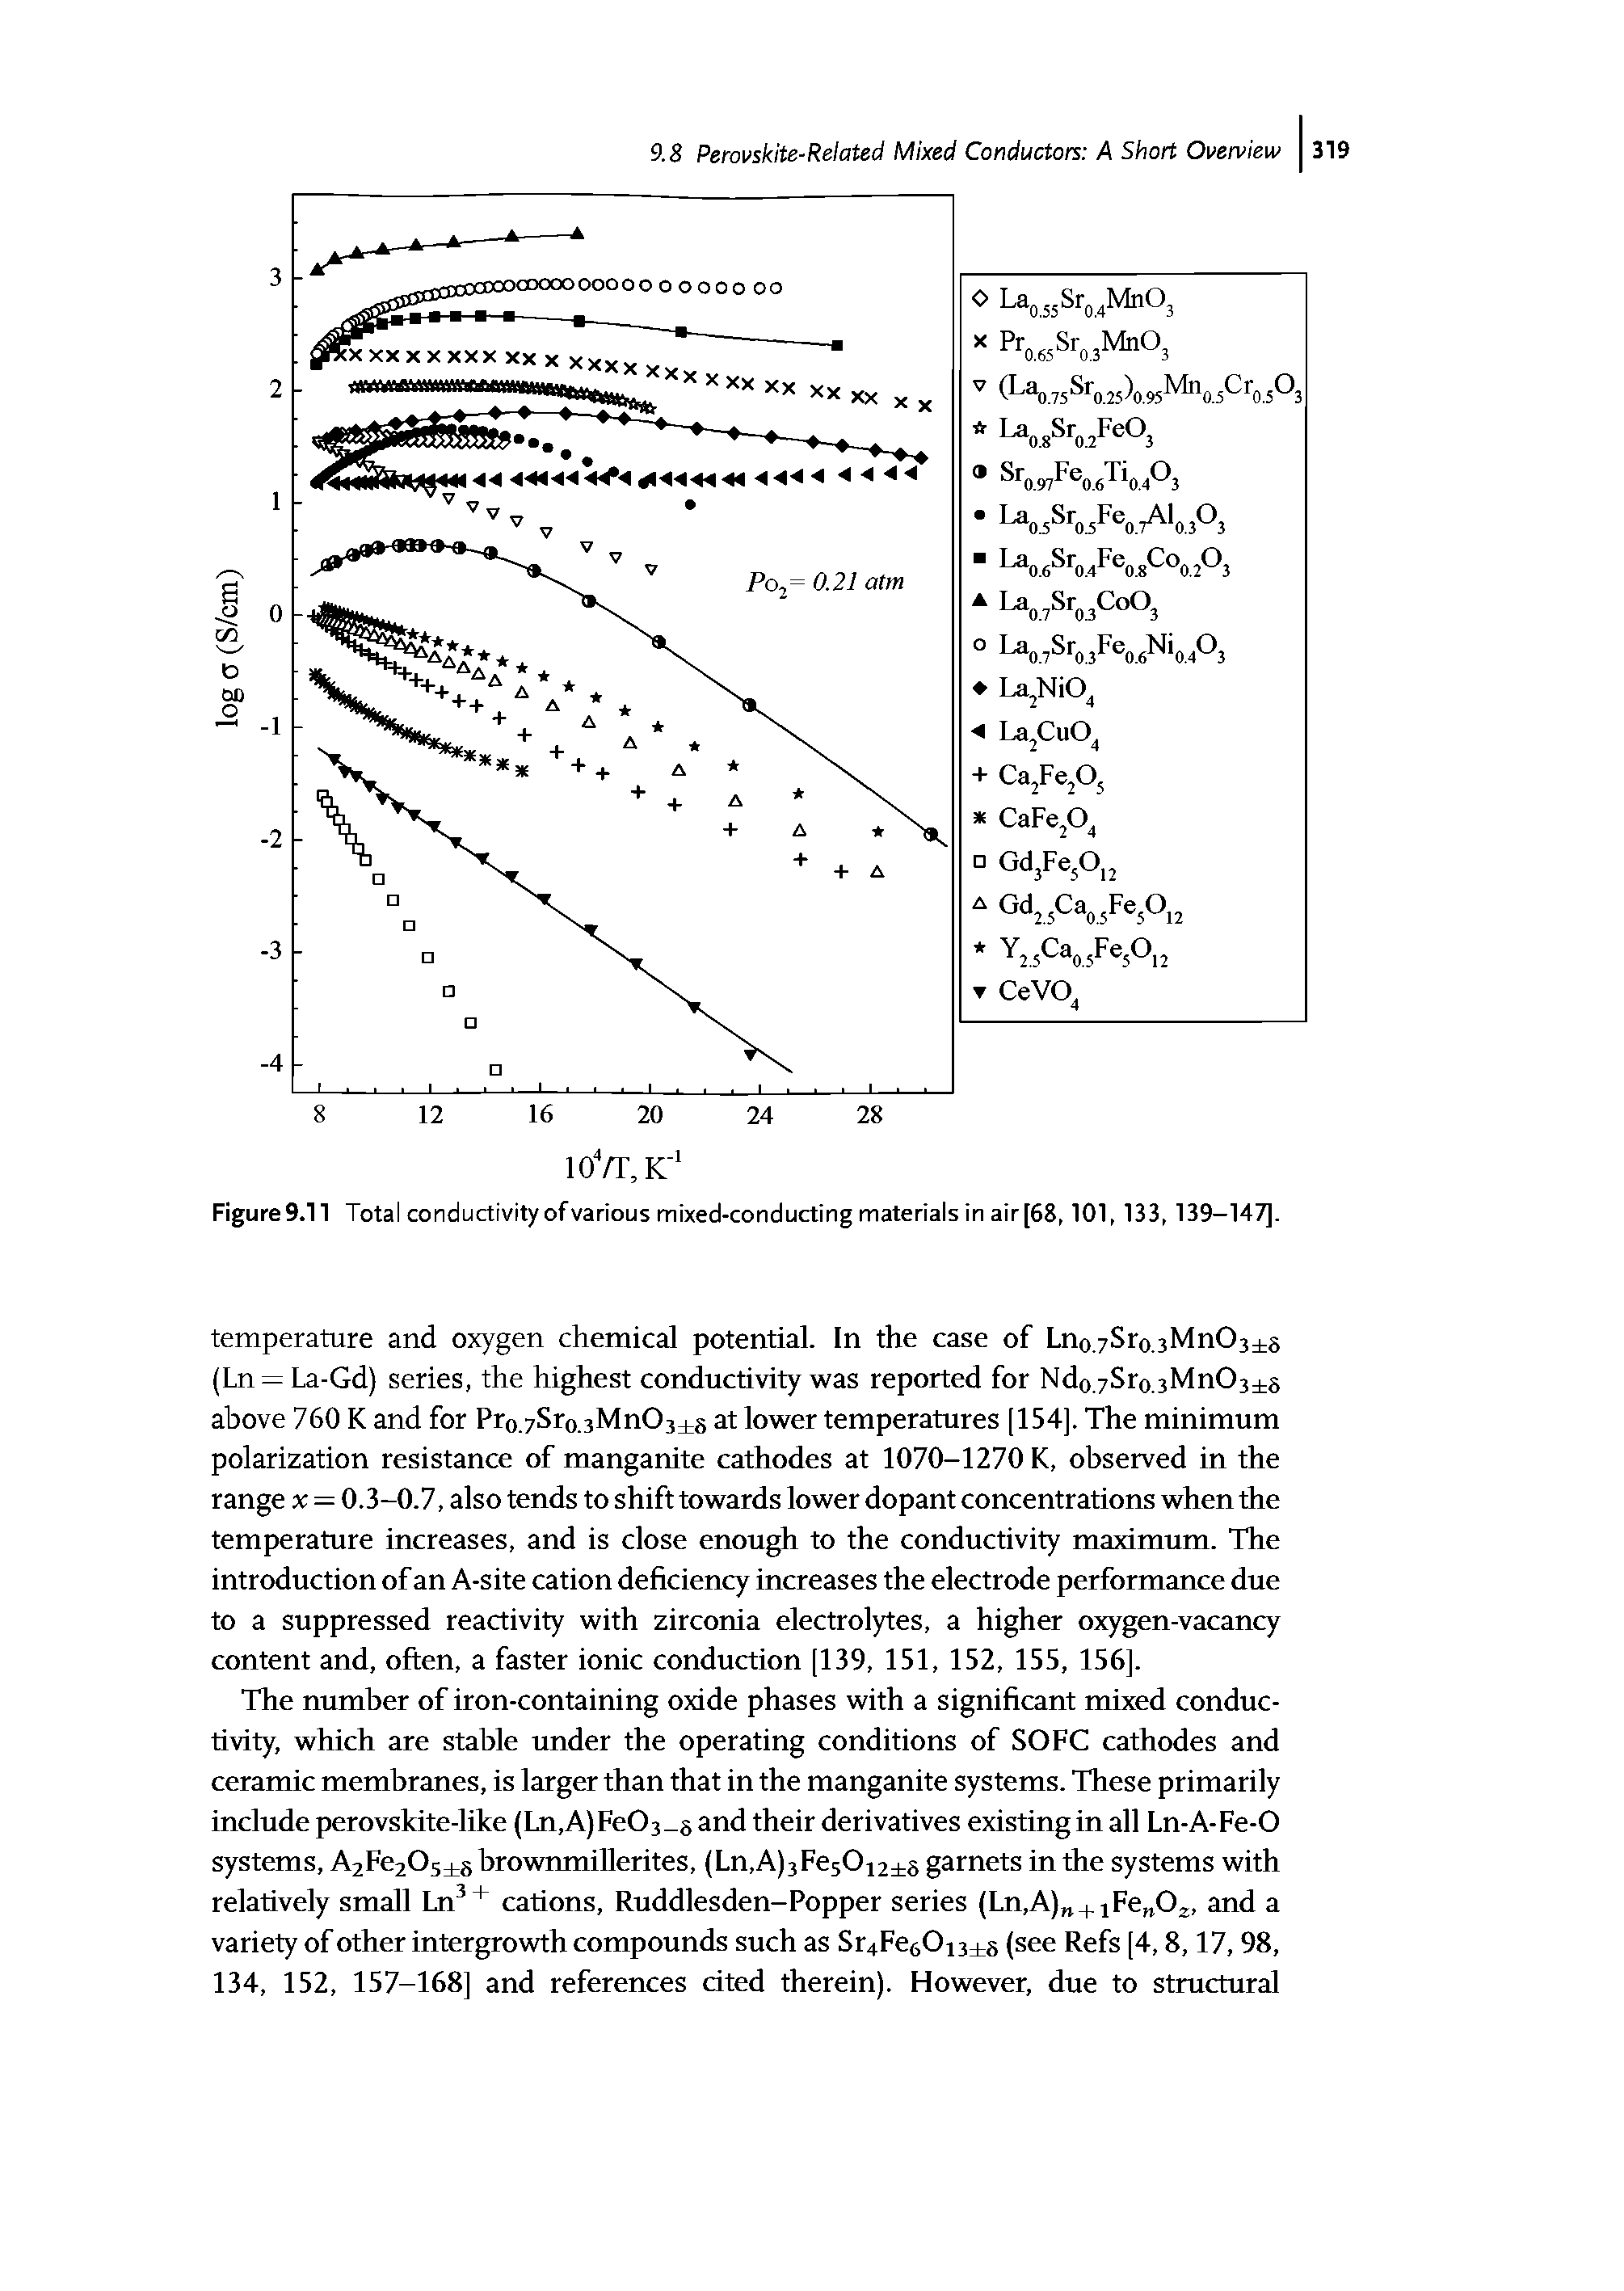 Figure9.11 Total conductivity of various mixed-conducting materials in air [68,101, 133, 139—147].